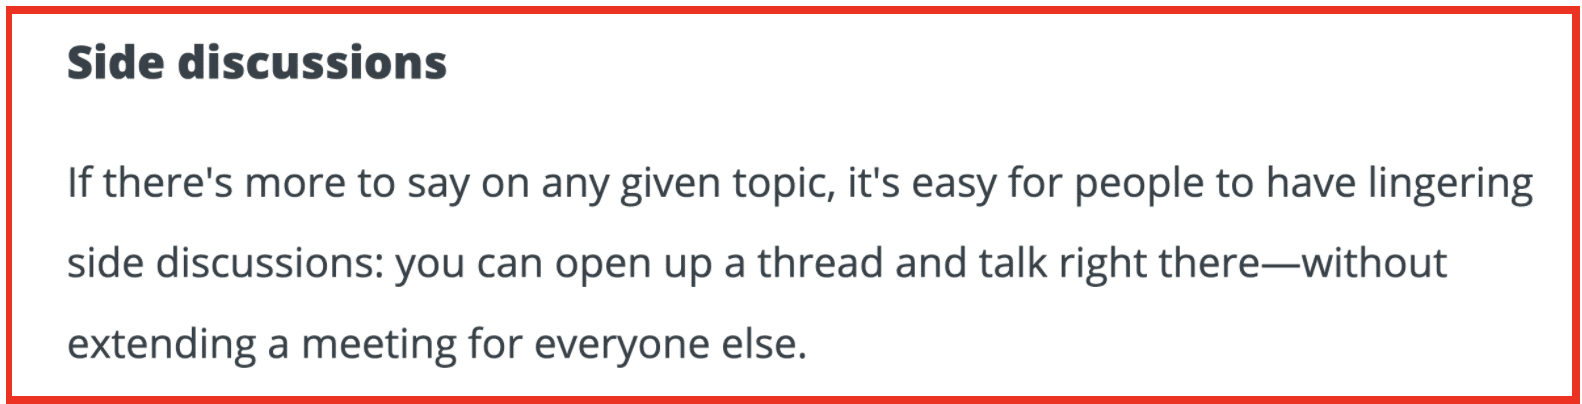 Side discussions: If there's more to say on any given topic, it's easy for people to have lingering side discussions: you can open up a thread and talk right there--without extending a meeting for everyone else.